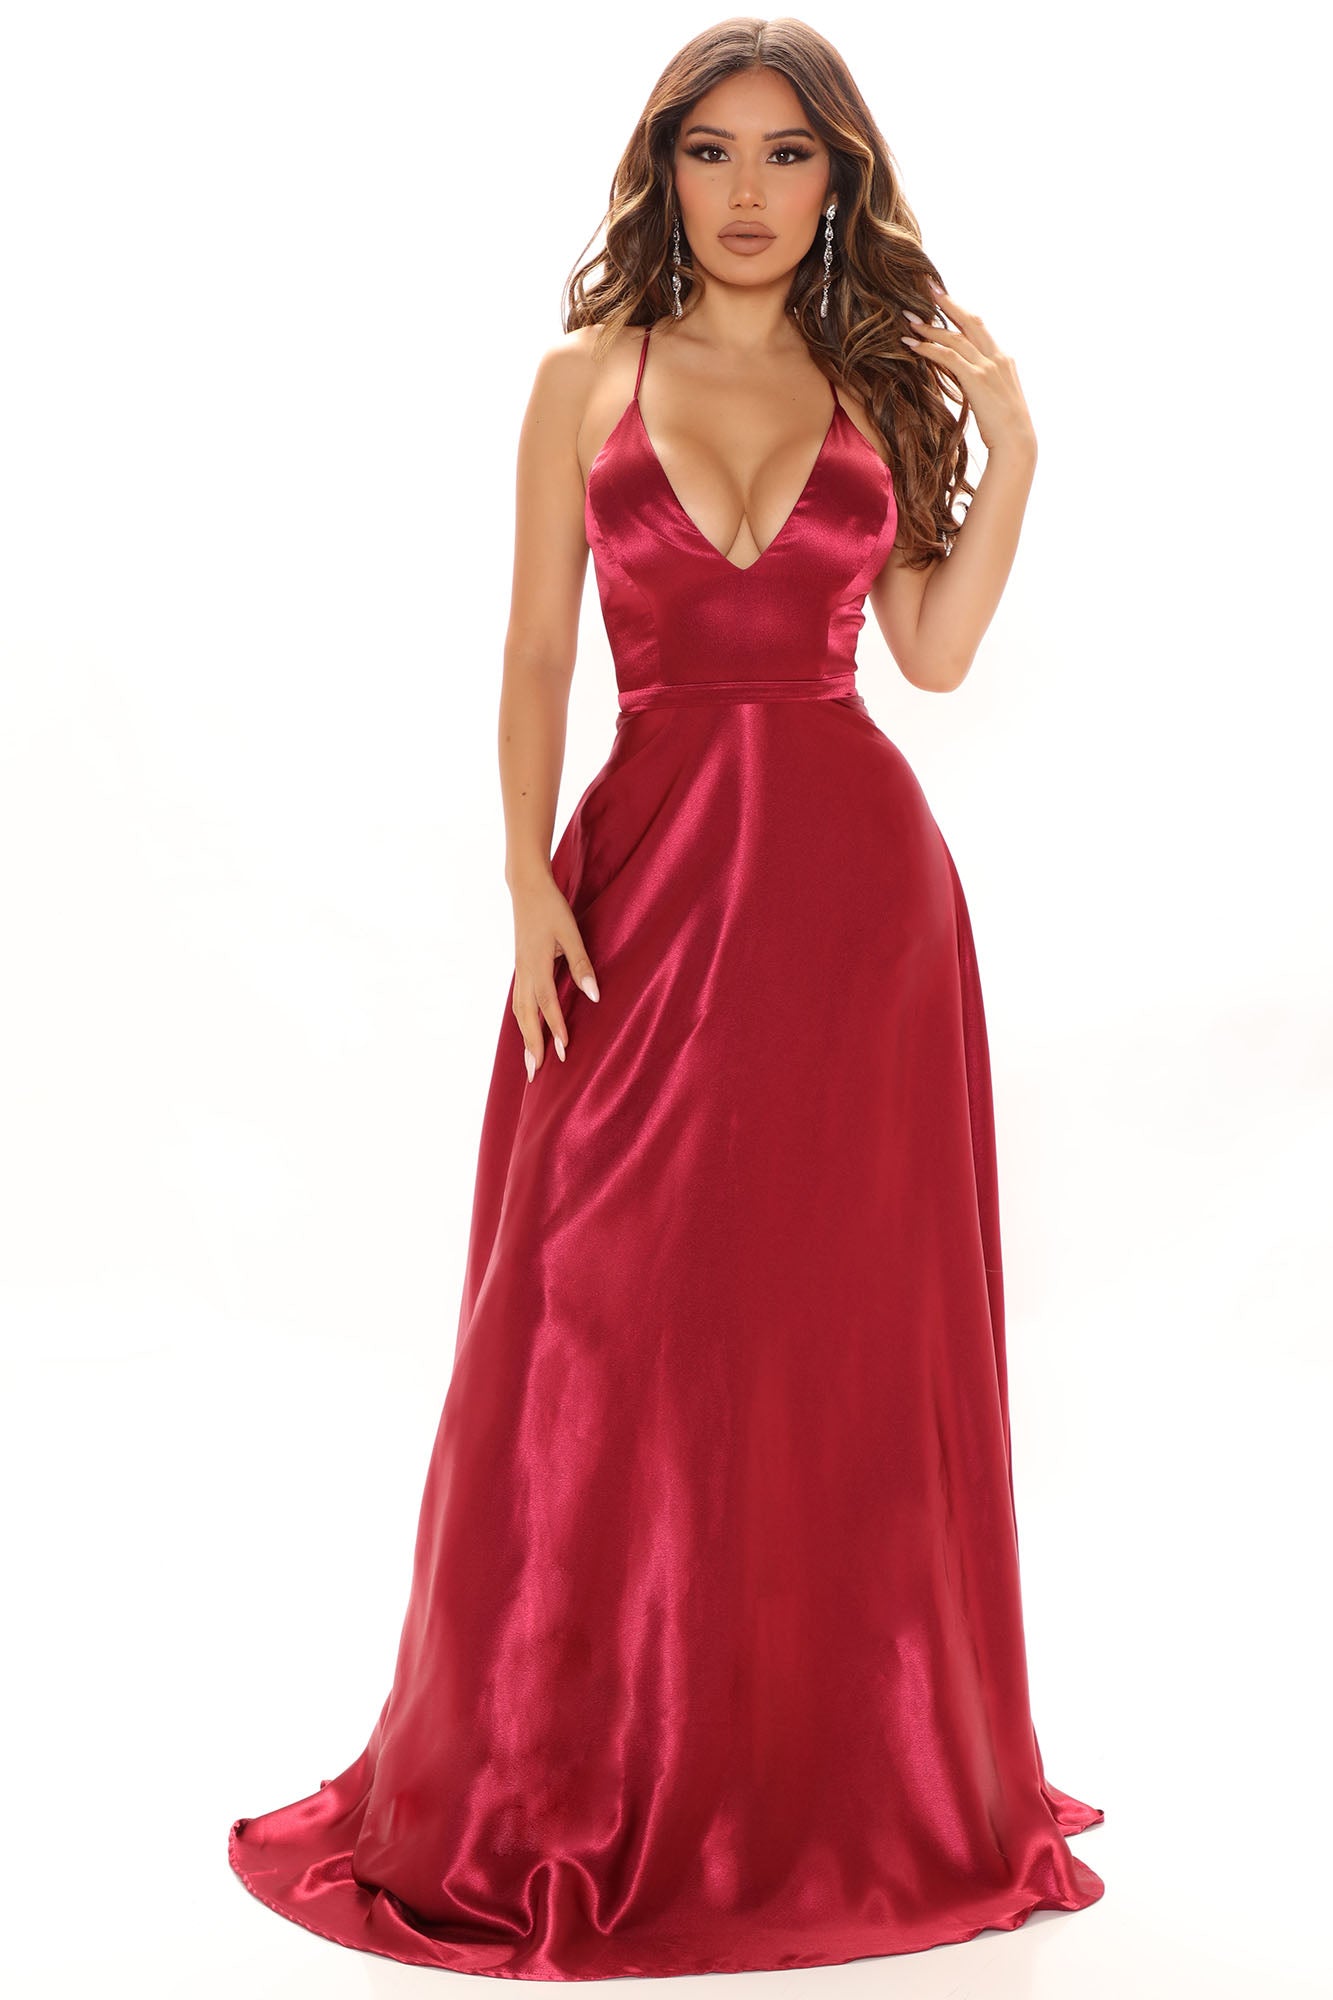 Fashionable Wine Mermaid Fashion Nova Evening Gowns V Neck Velvet Long  Train Prom Gown Simple South Africa Party Evening Wear Arabic Dubai With  Sleeve From Startdress, $81.02 | DHgate.Com